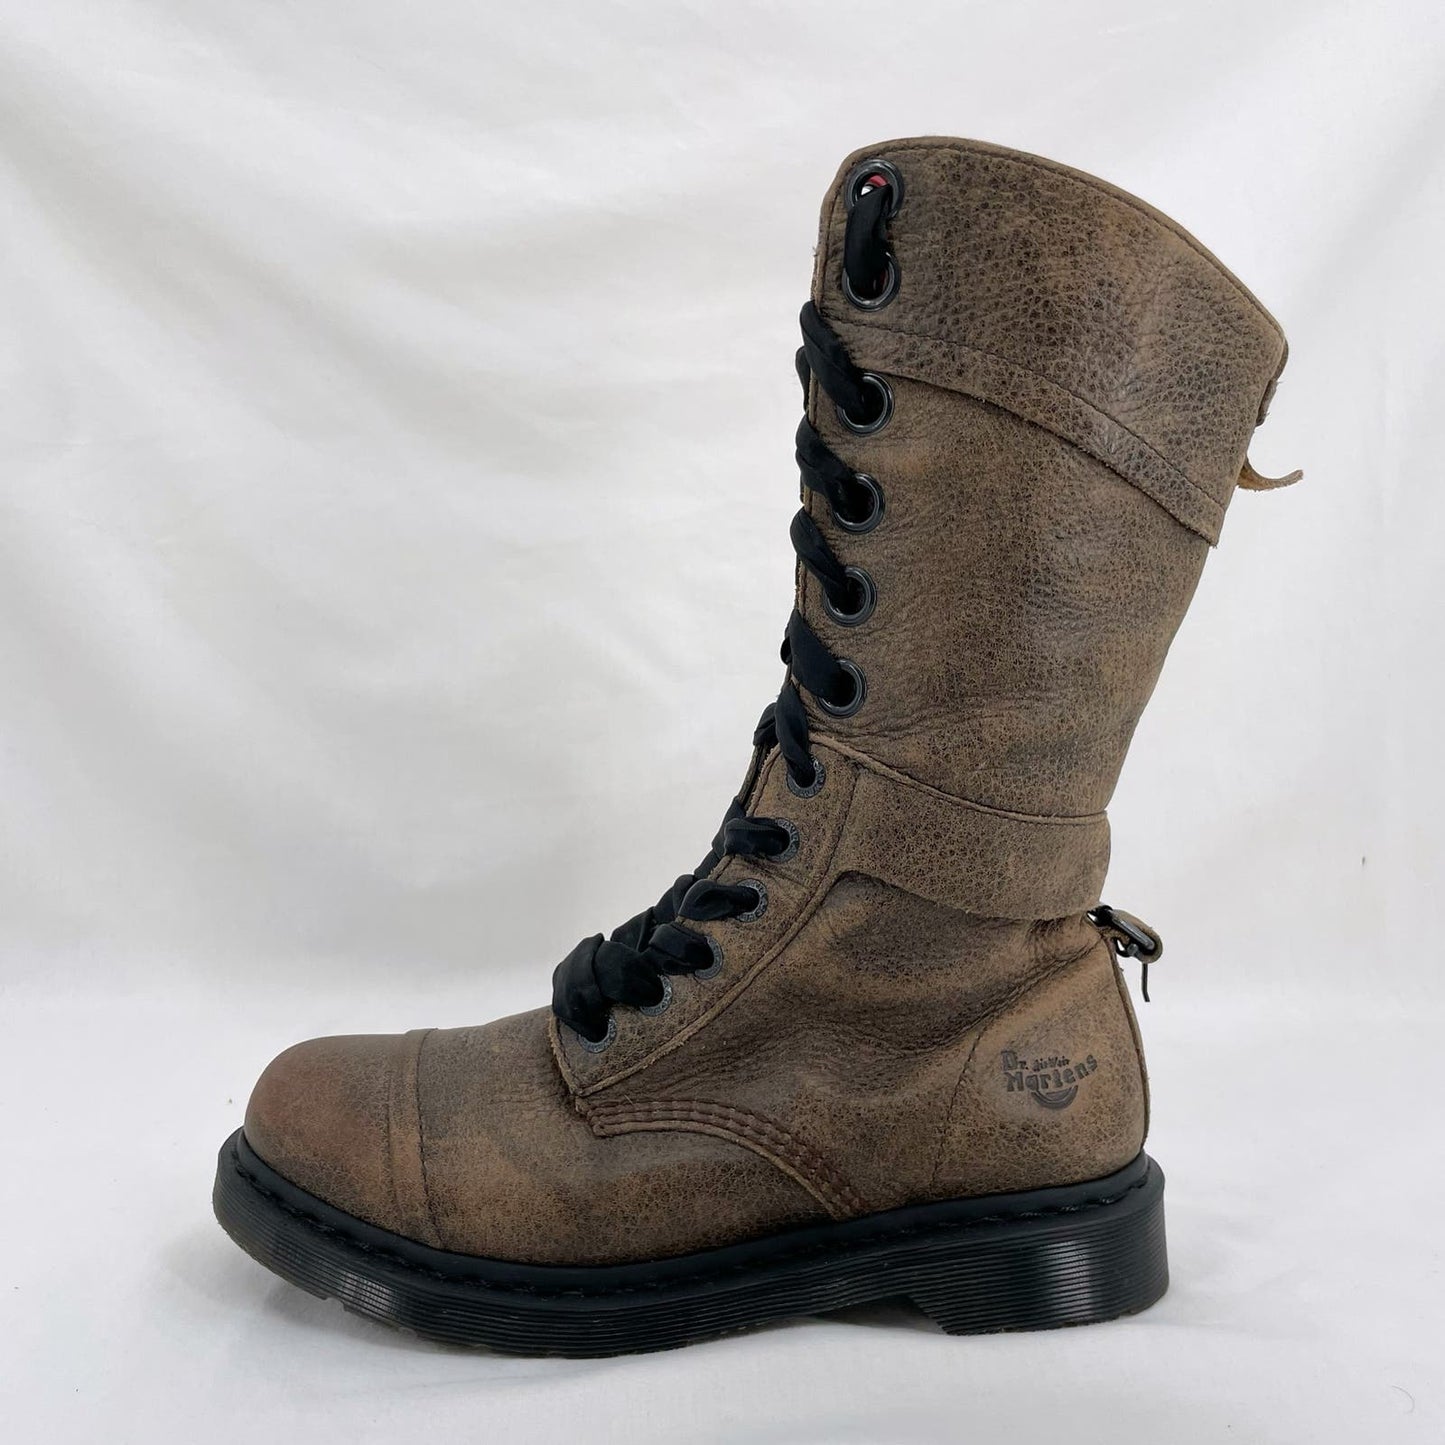 Dr. Martens Triumph Tall Fold Over Boots Pebbled Brown Leather Union Jack Size 9